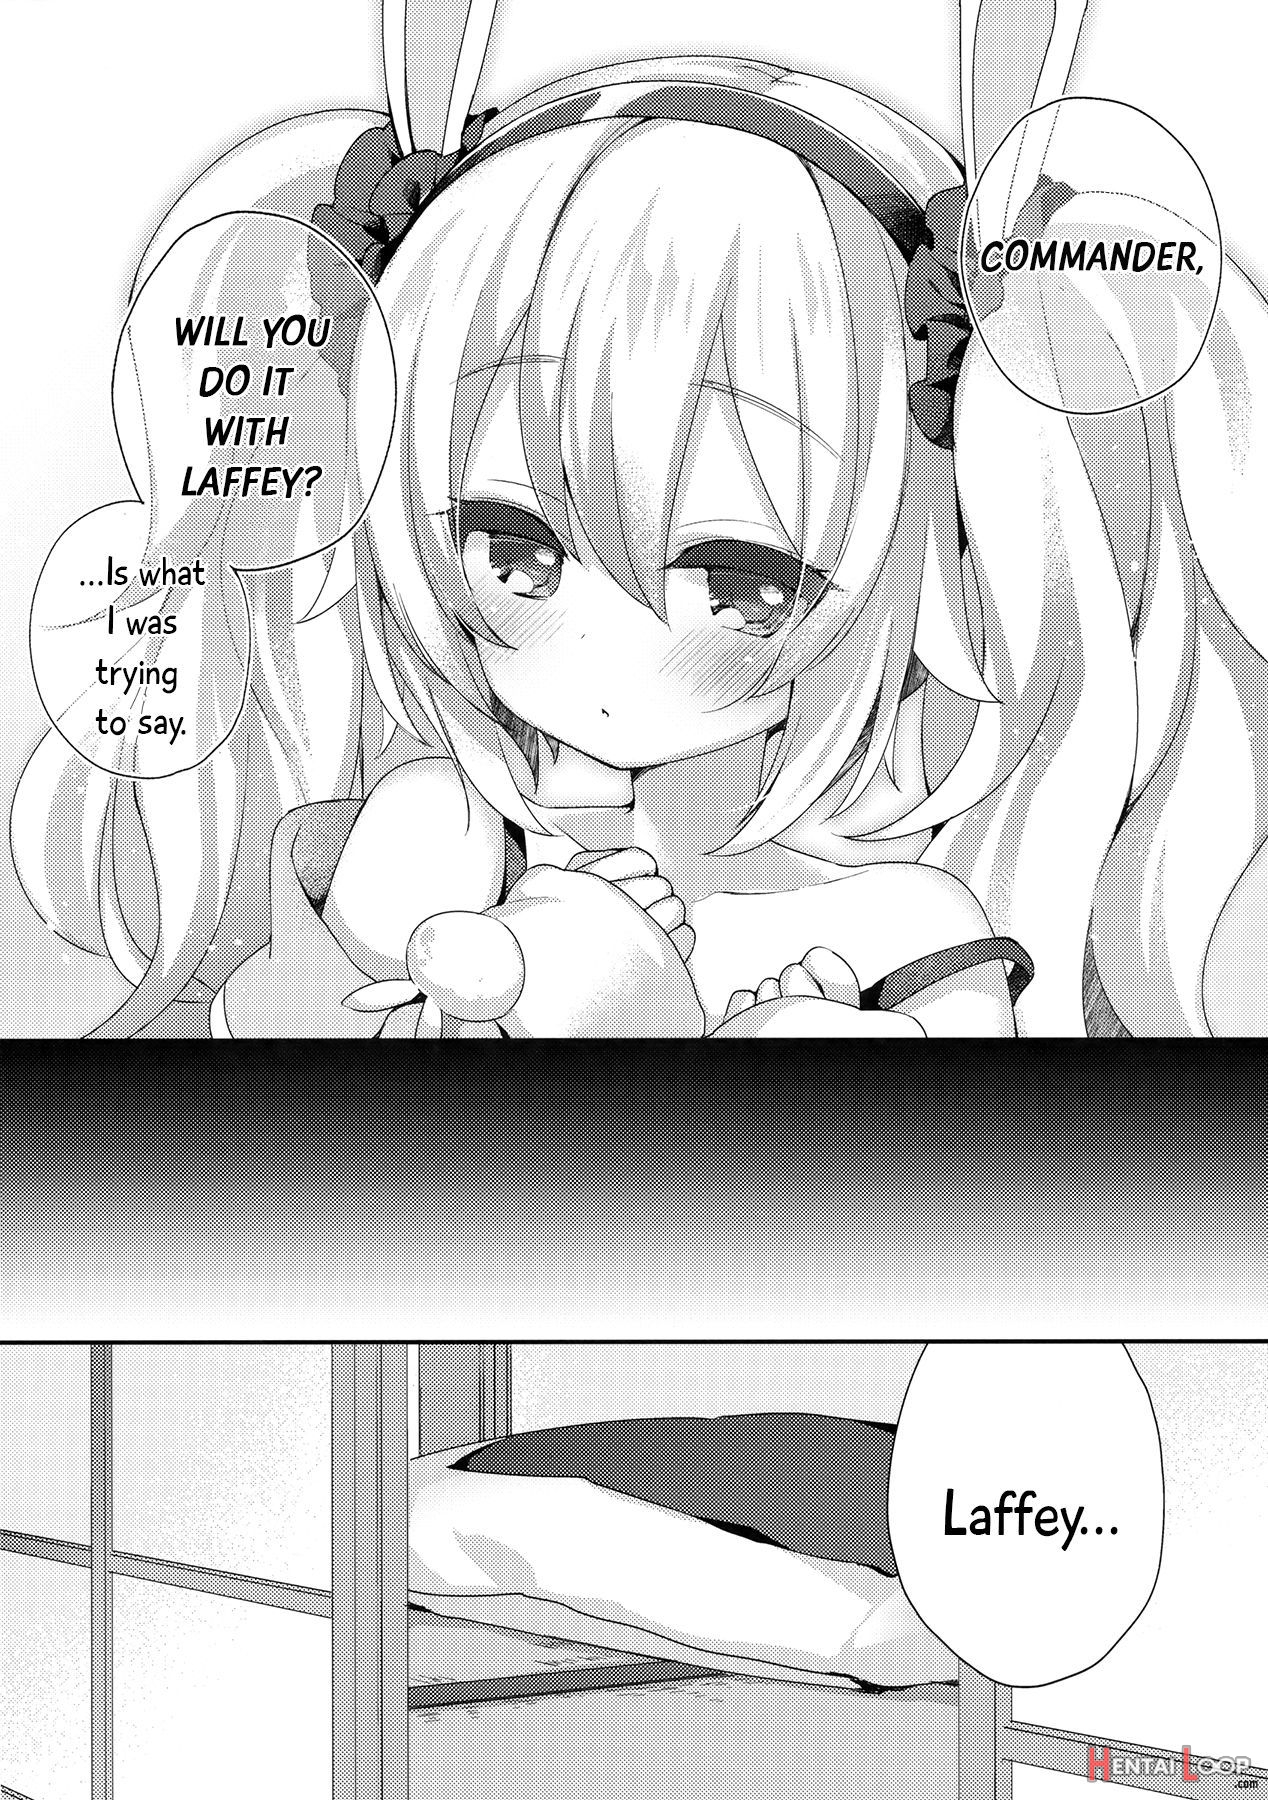 Commander, Will You... With Laffey? page 7